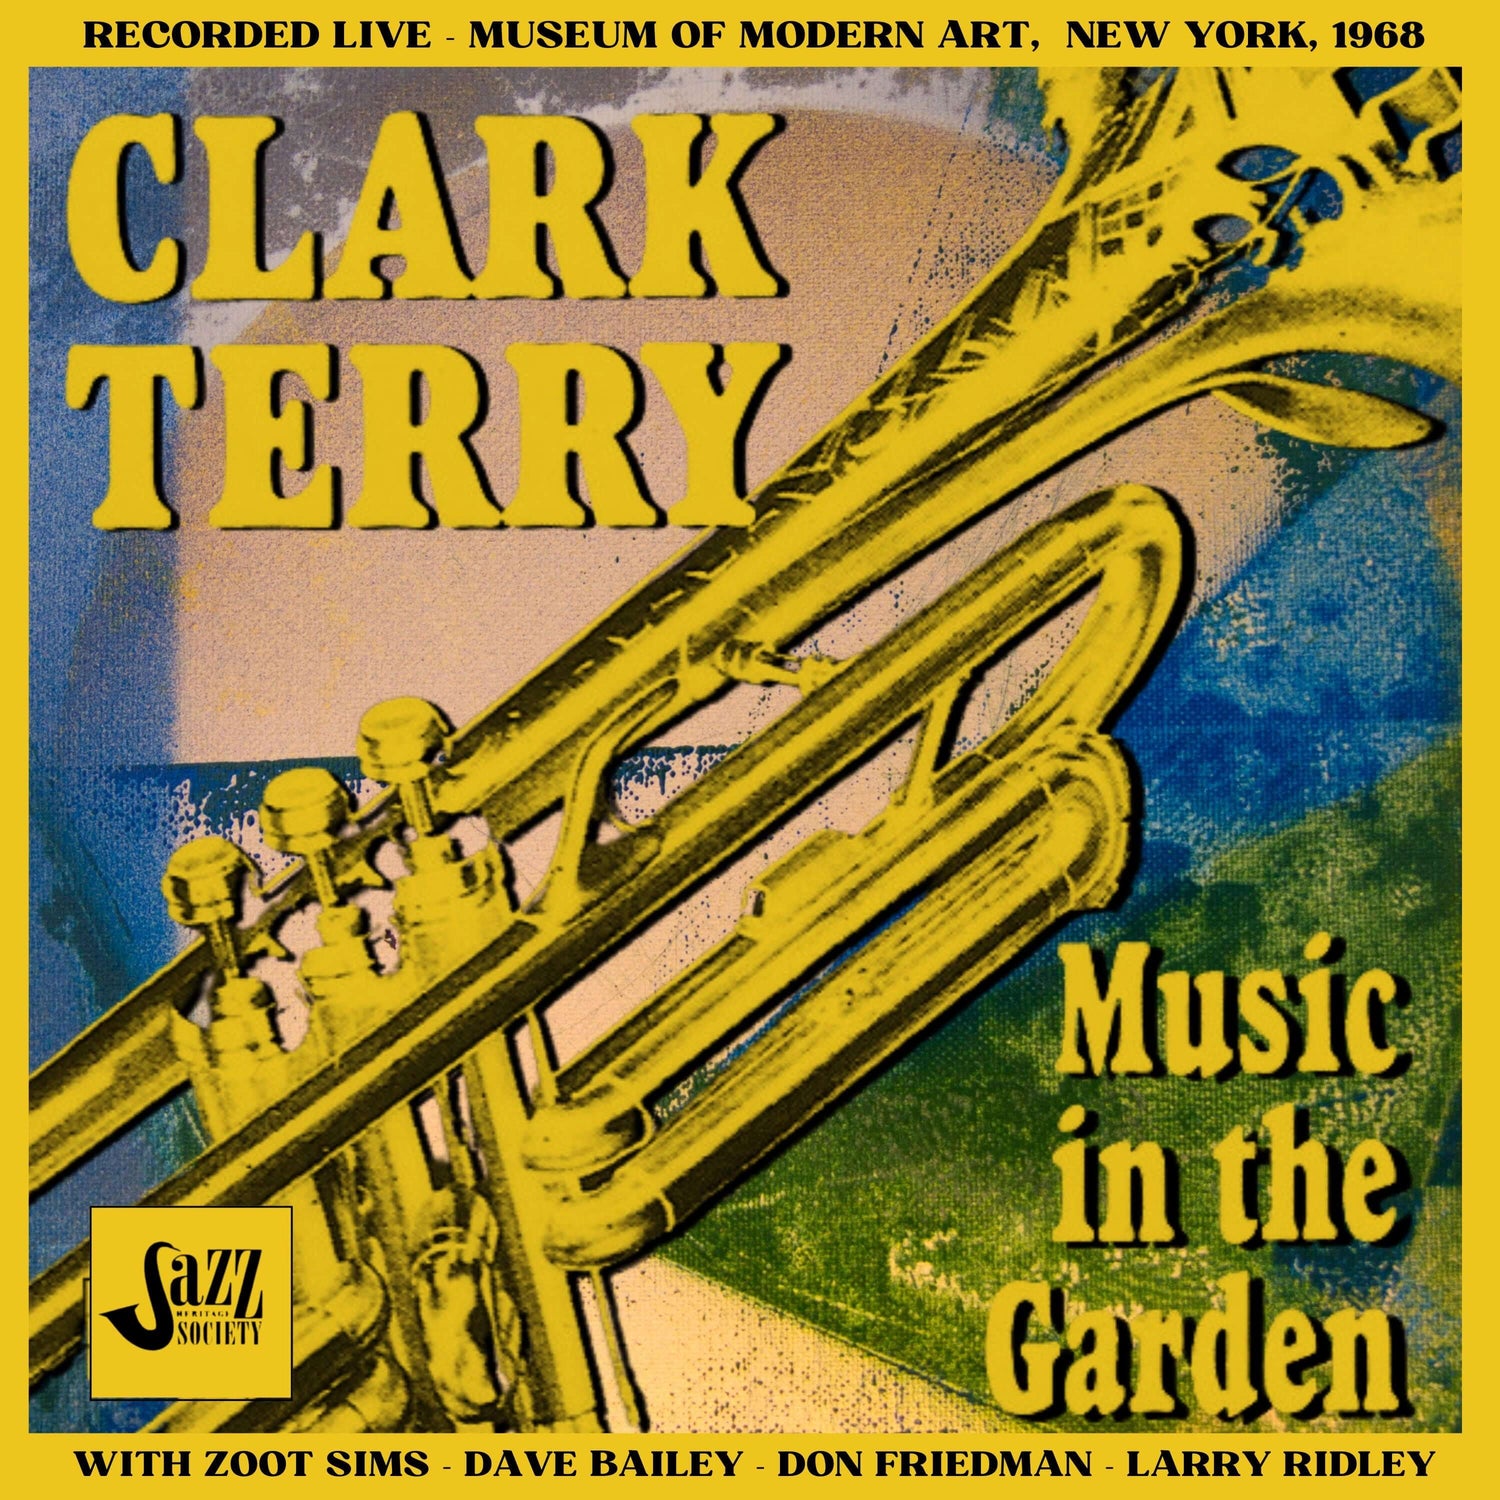 Cover of Clark Terry's album 'Music in The Garden' recorded live at the Museum of Modern Art in 1968, featuring a trumpet and colorful background